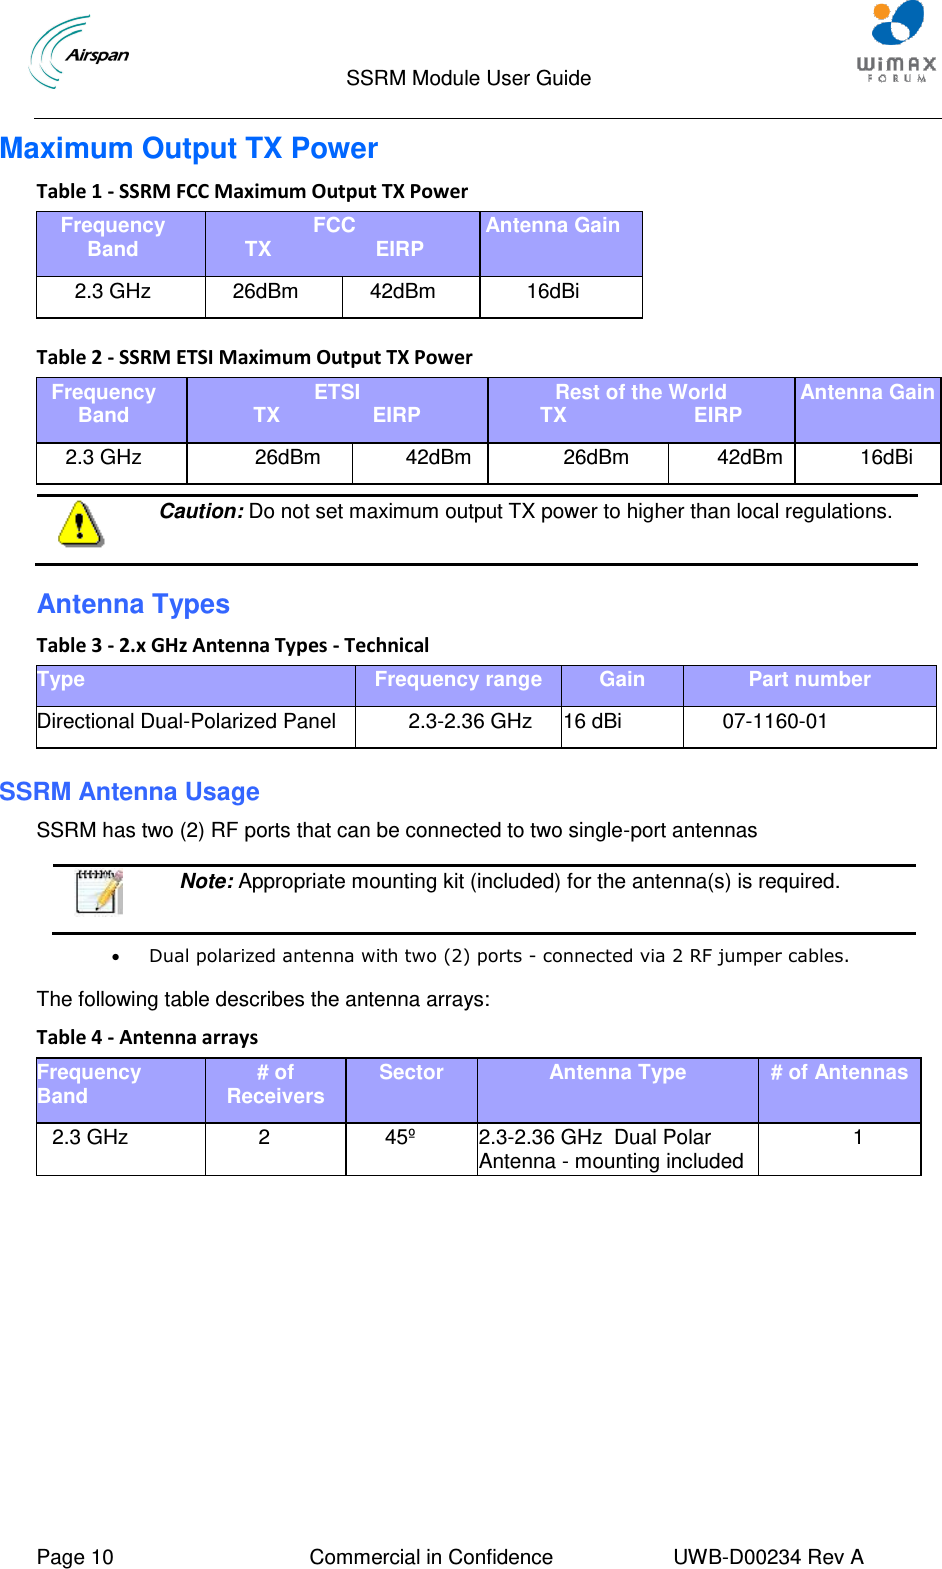                                  SSRM Module User Guide     Page 10  Commercial in Confidence  UWB-D00234 Rev A    Maximum Output TX Power Table 1 - SSRM FCC Maximum Output TX Power Frequency Band FCC TX                  EIRP Antenna Gain 2.3 GHz 26dBm 42dBm 16dBi   Table 2 - SSRM ETSI Maximum Output TX Power Frequency Band ETSI TX                EIRP Rest of the World TX                      EIRP Antenna Gain 2.3 GHz 26dBm 42dBm 26dBm 42dBm 16dBi   Caution: Do not set maximum output TX power to higher than local regulations.  Antenna Types Table 3 - 2.x GHz Antenna Types - Technical Type Frequency range Gain Part number Directional Dual-Polarized Panel  2.3-2.36 GHz 16 dBi 07-1160-01  SSRM Antenna Usage SSRM has two (2) RF ports that can be connected to two single-port antennas    Note: Appropriate mounting kit (included) for the antenna(s) is required.   Dual polarized antenna with two (2) ports - connected via 2 RF jumper cables.  The following table describes the antenna arrays: Table 4 - Antenna arrays Frequency Band # of Receivers Sector Antenna Type # of Antennas  2.3 GHz 2 45º 2.3-2.36 GHz  Dual Polar Antenna - mounting included 1    